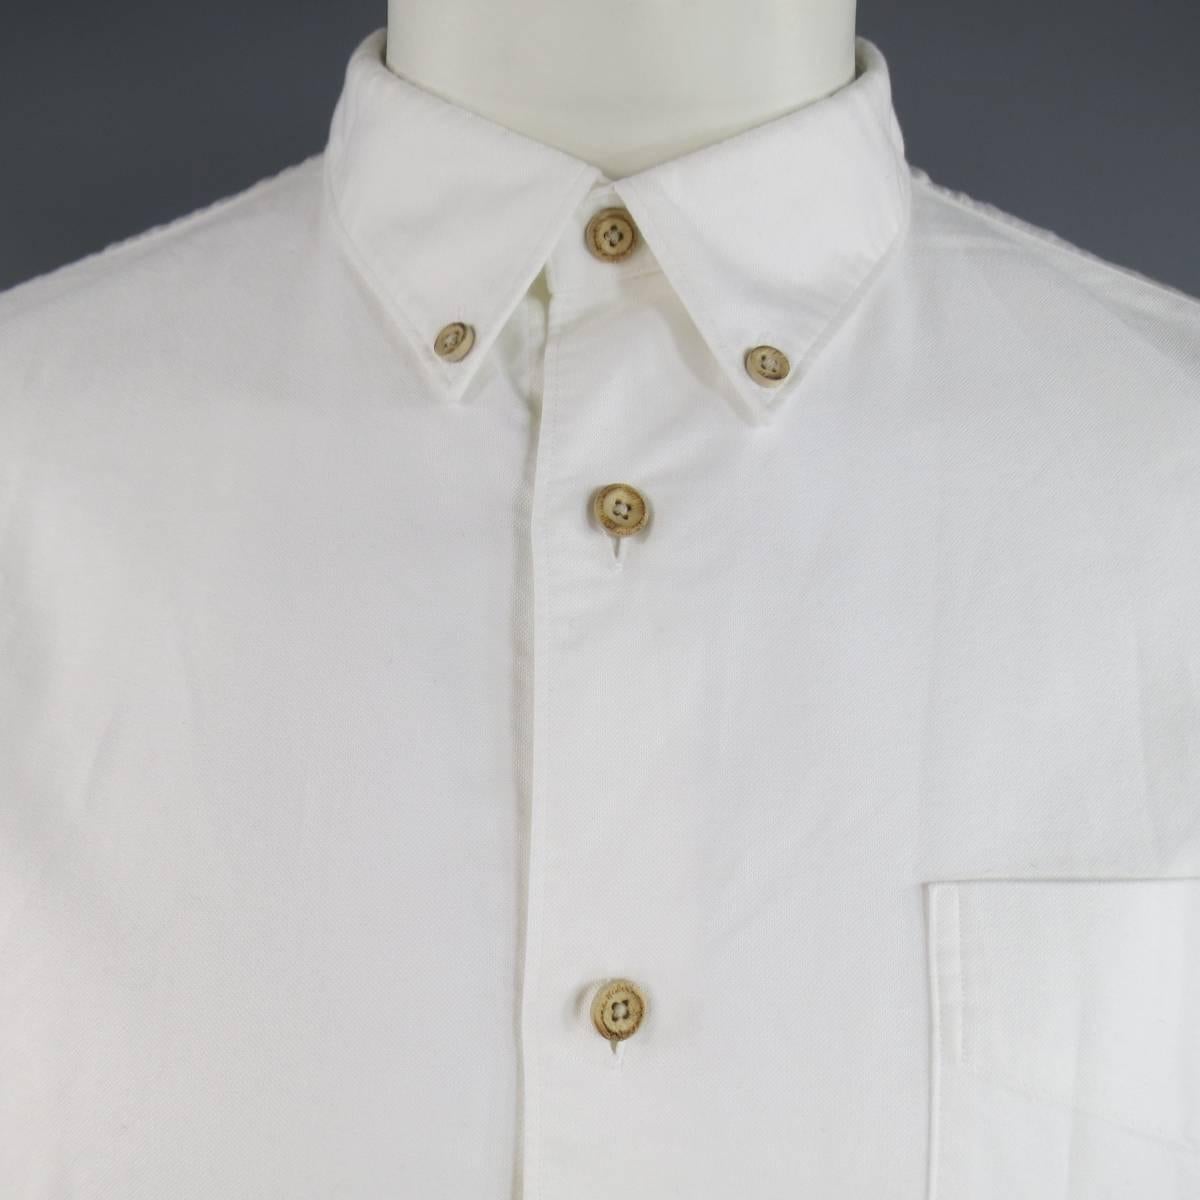 VISVIM Long Sleeve Shirt consists of 100% cotton material in a white color tone. Designed in a button-down front, single patch pocket with double button cuffs. Detailed with wooden buttons, elbow patches and "I.C.T" red stitching on right